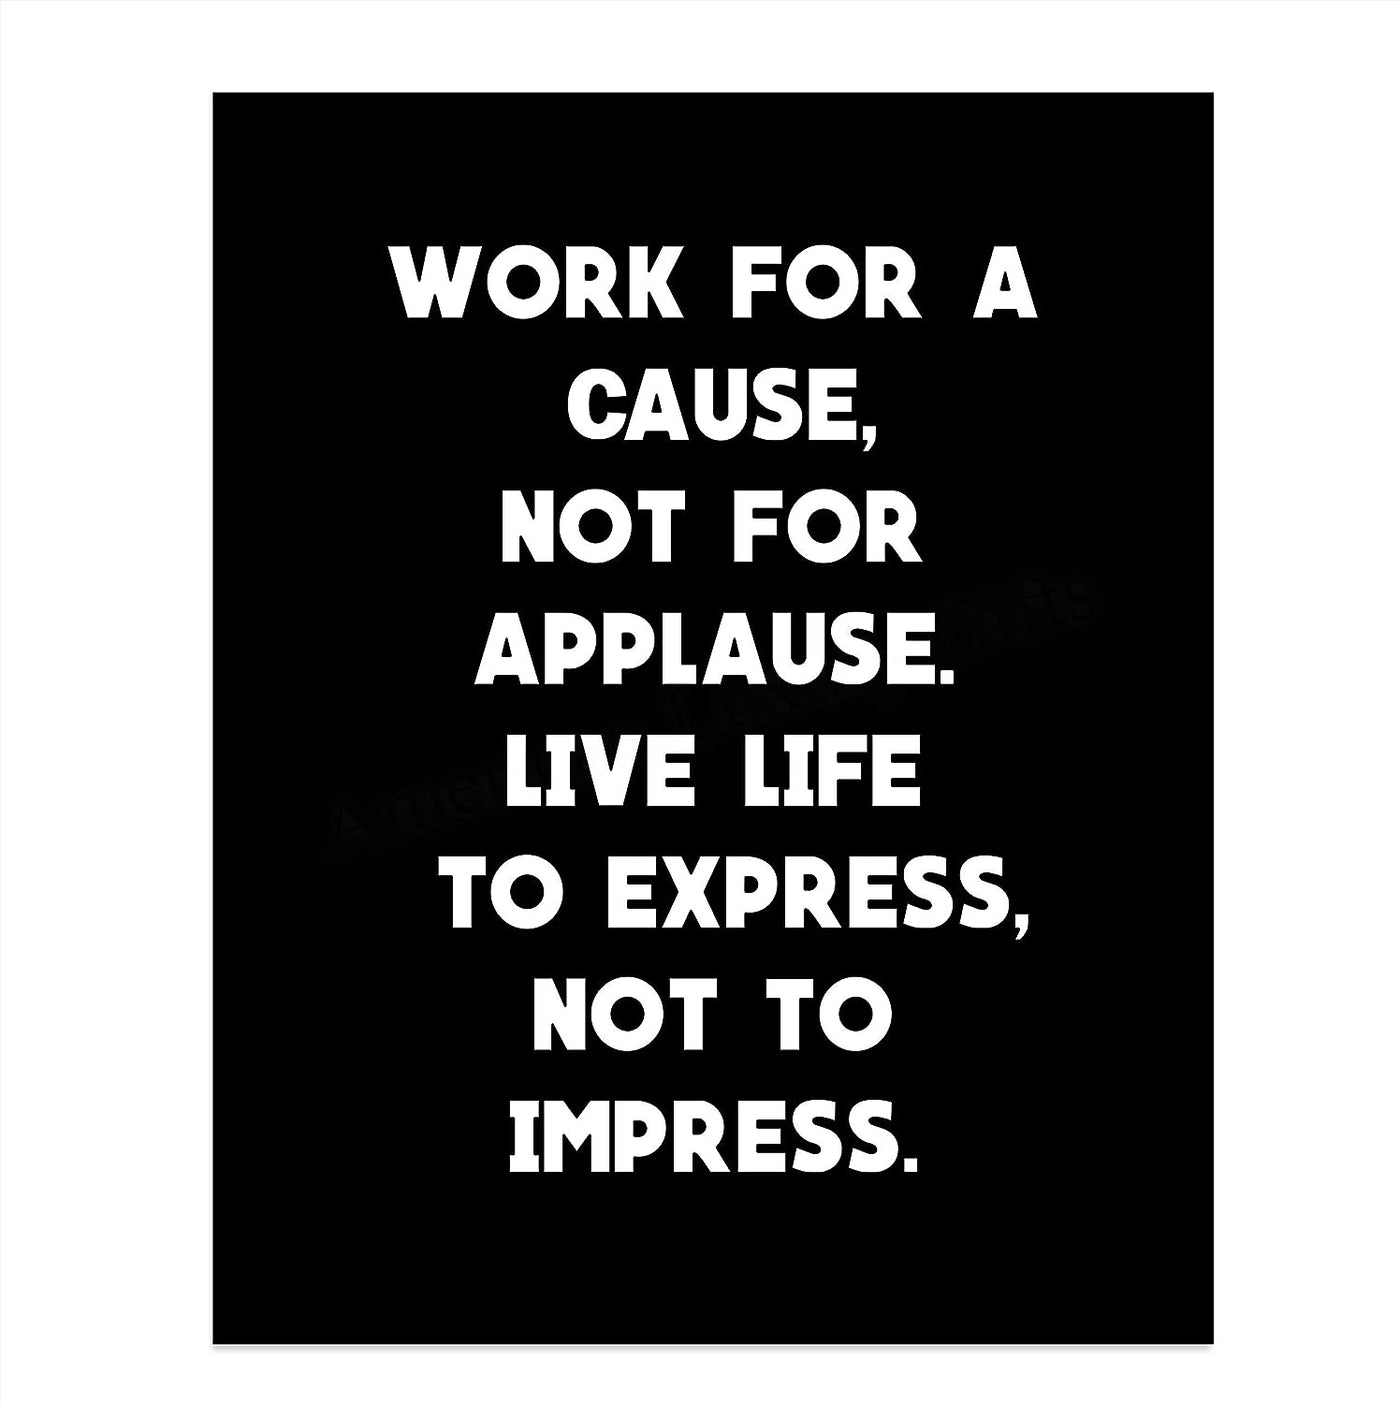 Work For A Cause-Not For Applause- Motivational Quotes Wall Art- 8 x 10" Modern Inspirational Poster Print- Ready to Frame. Typographic Home-Office-Classroom Decor. Perfect Gift of Motivation!